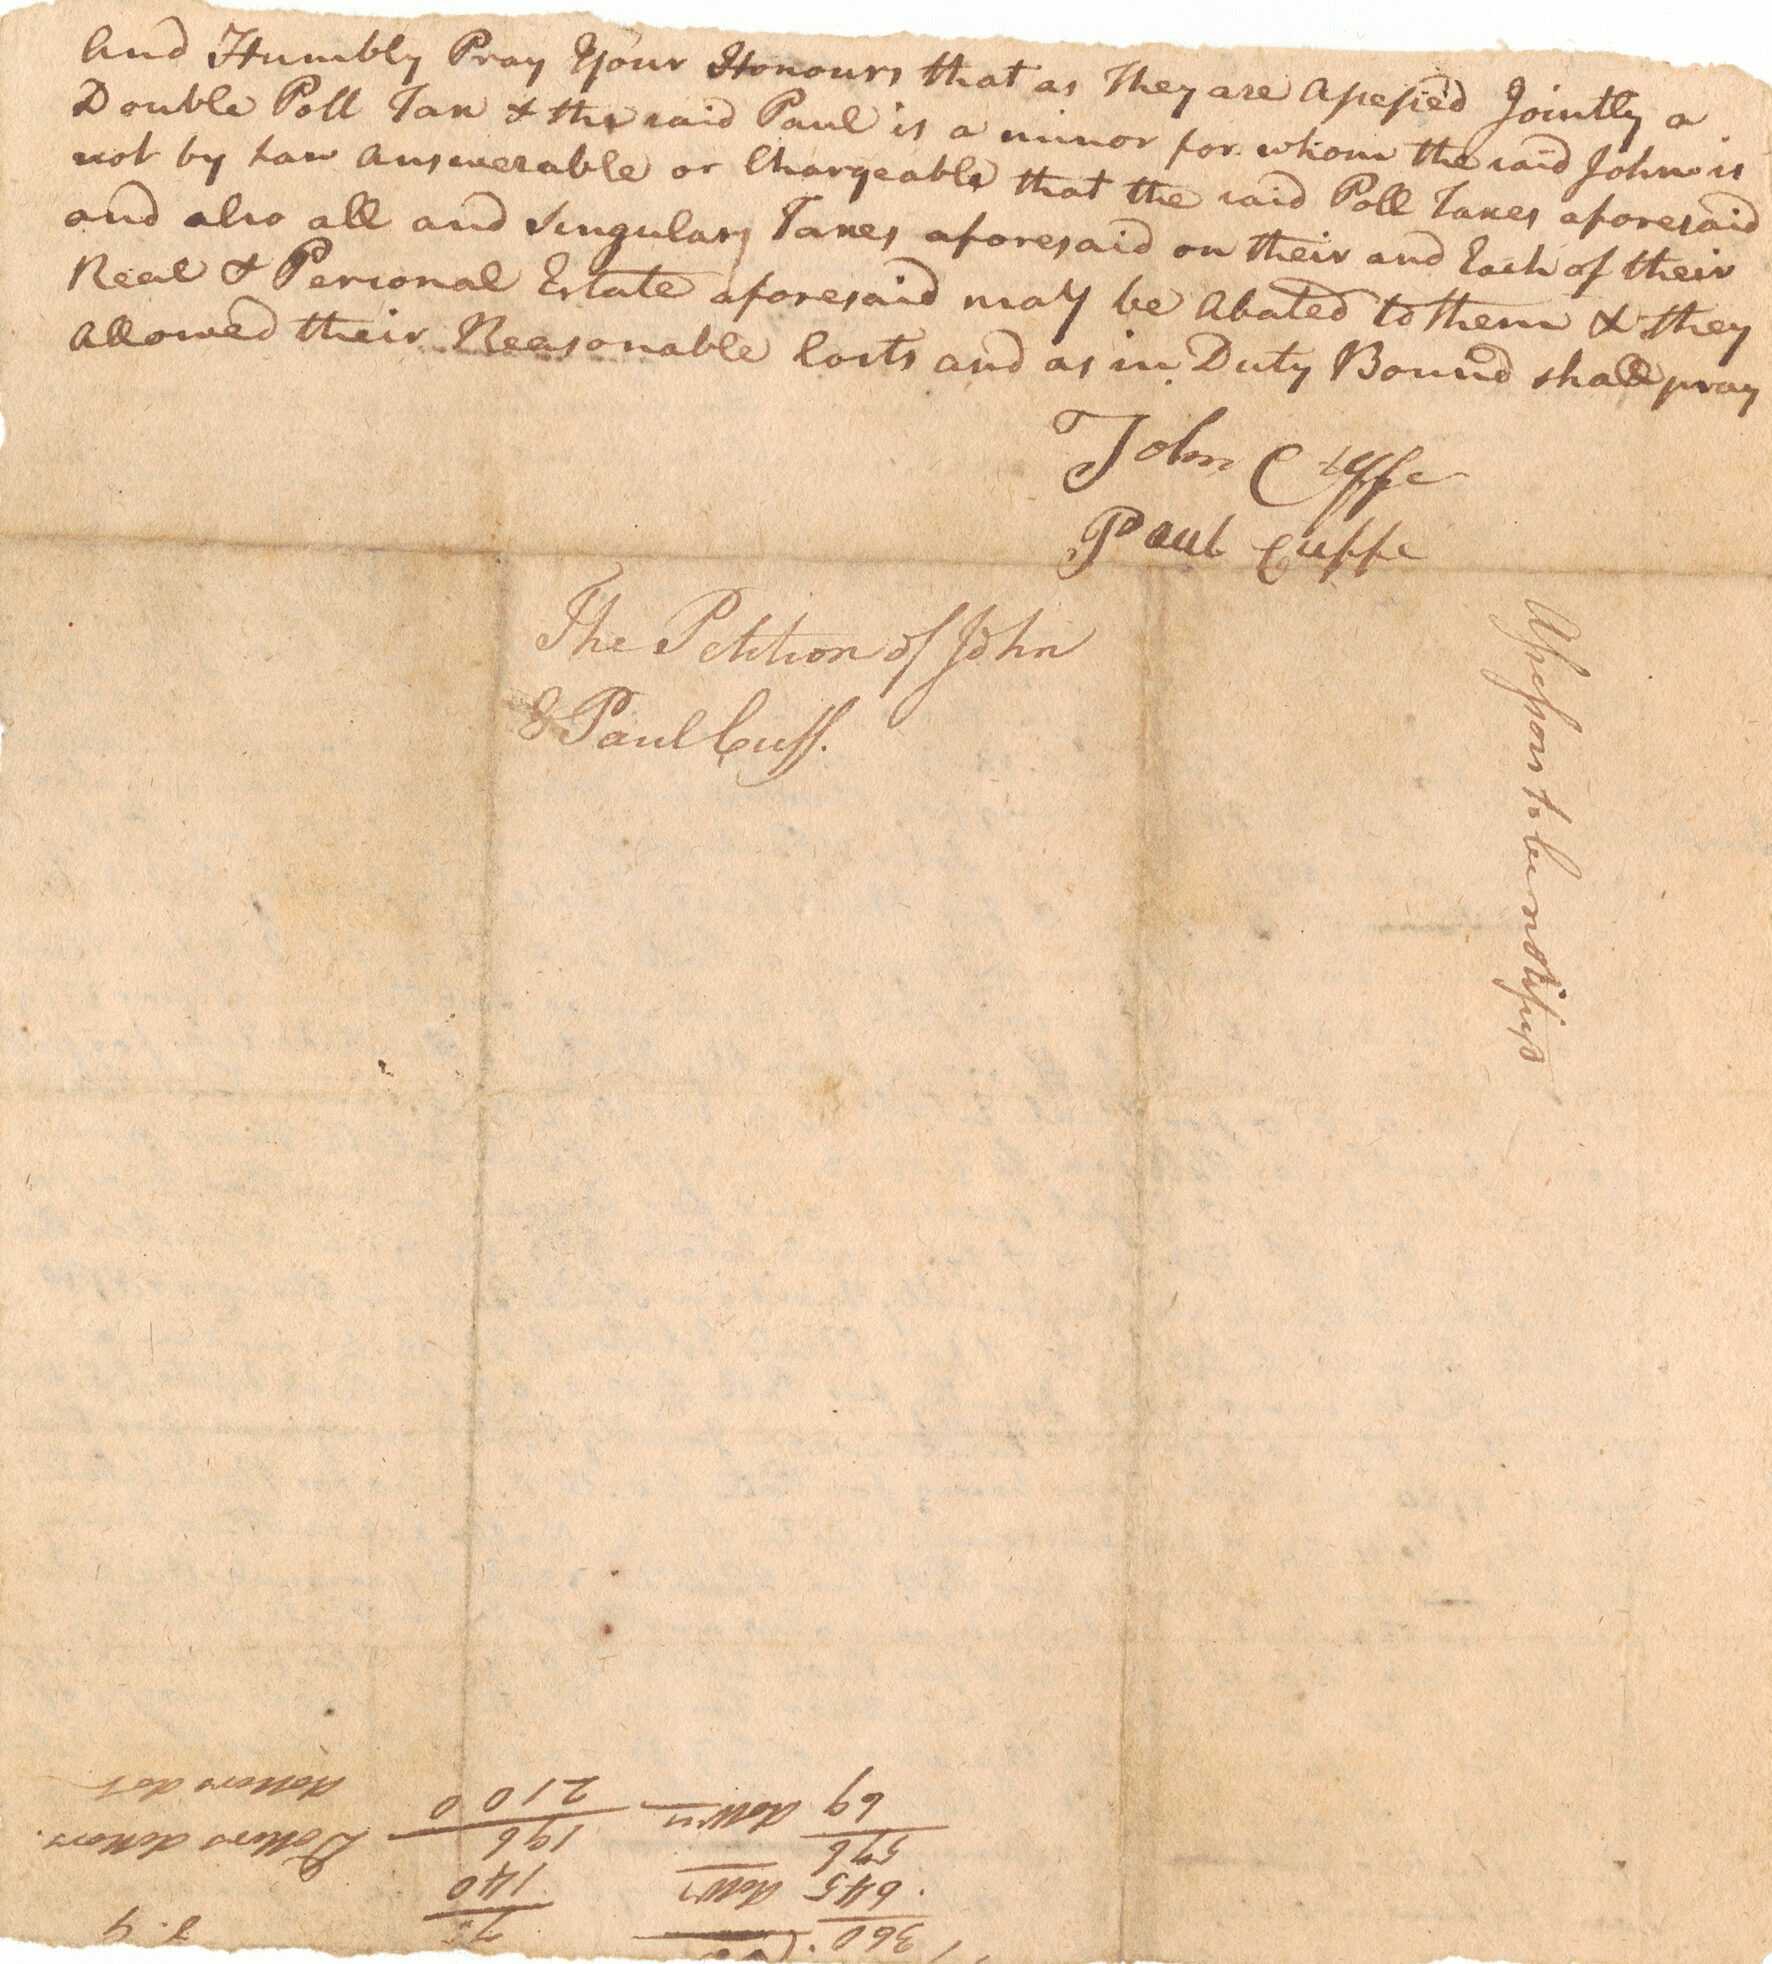 Petition document signed by John Cuffe and Paul Cuffe